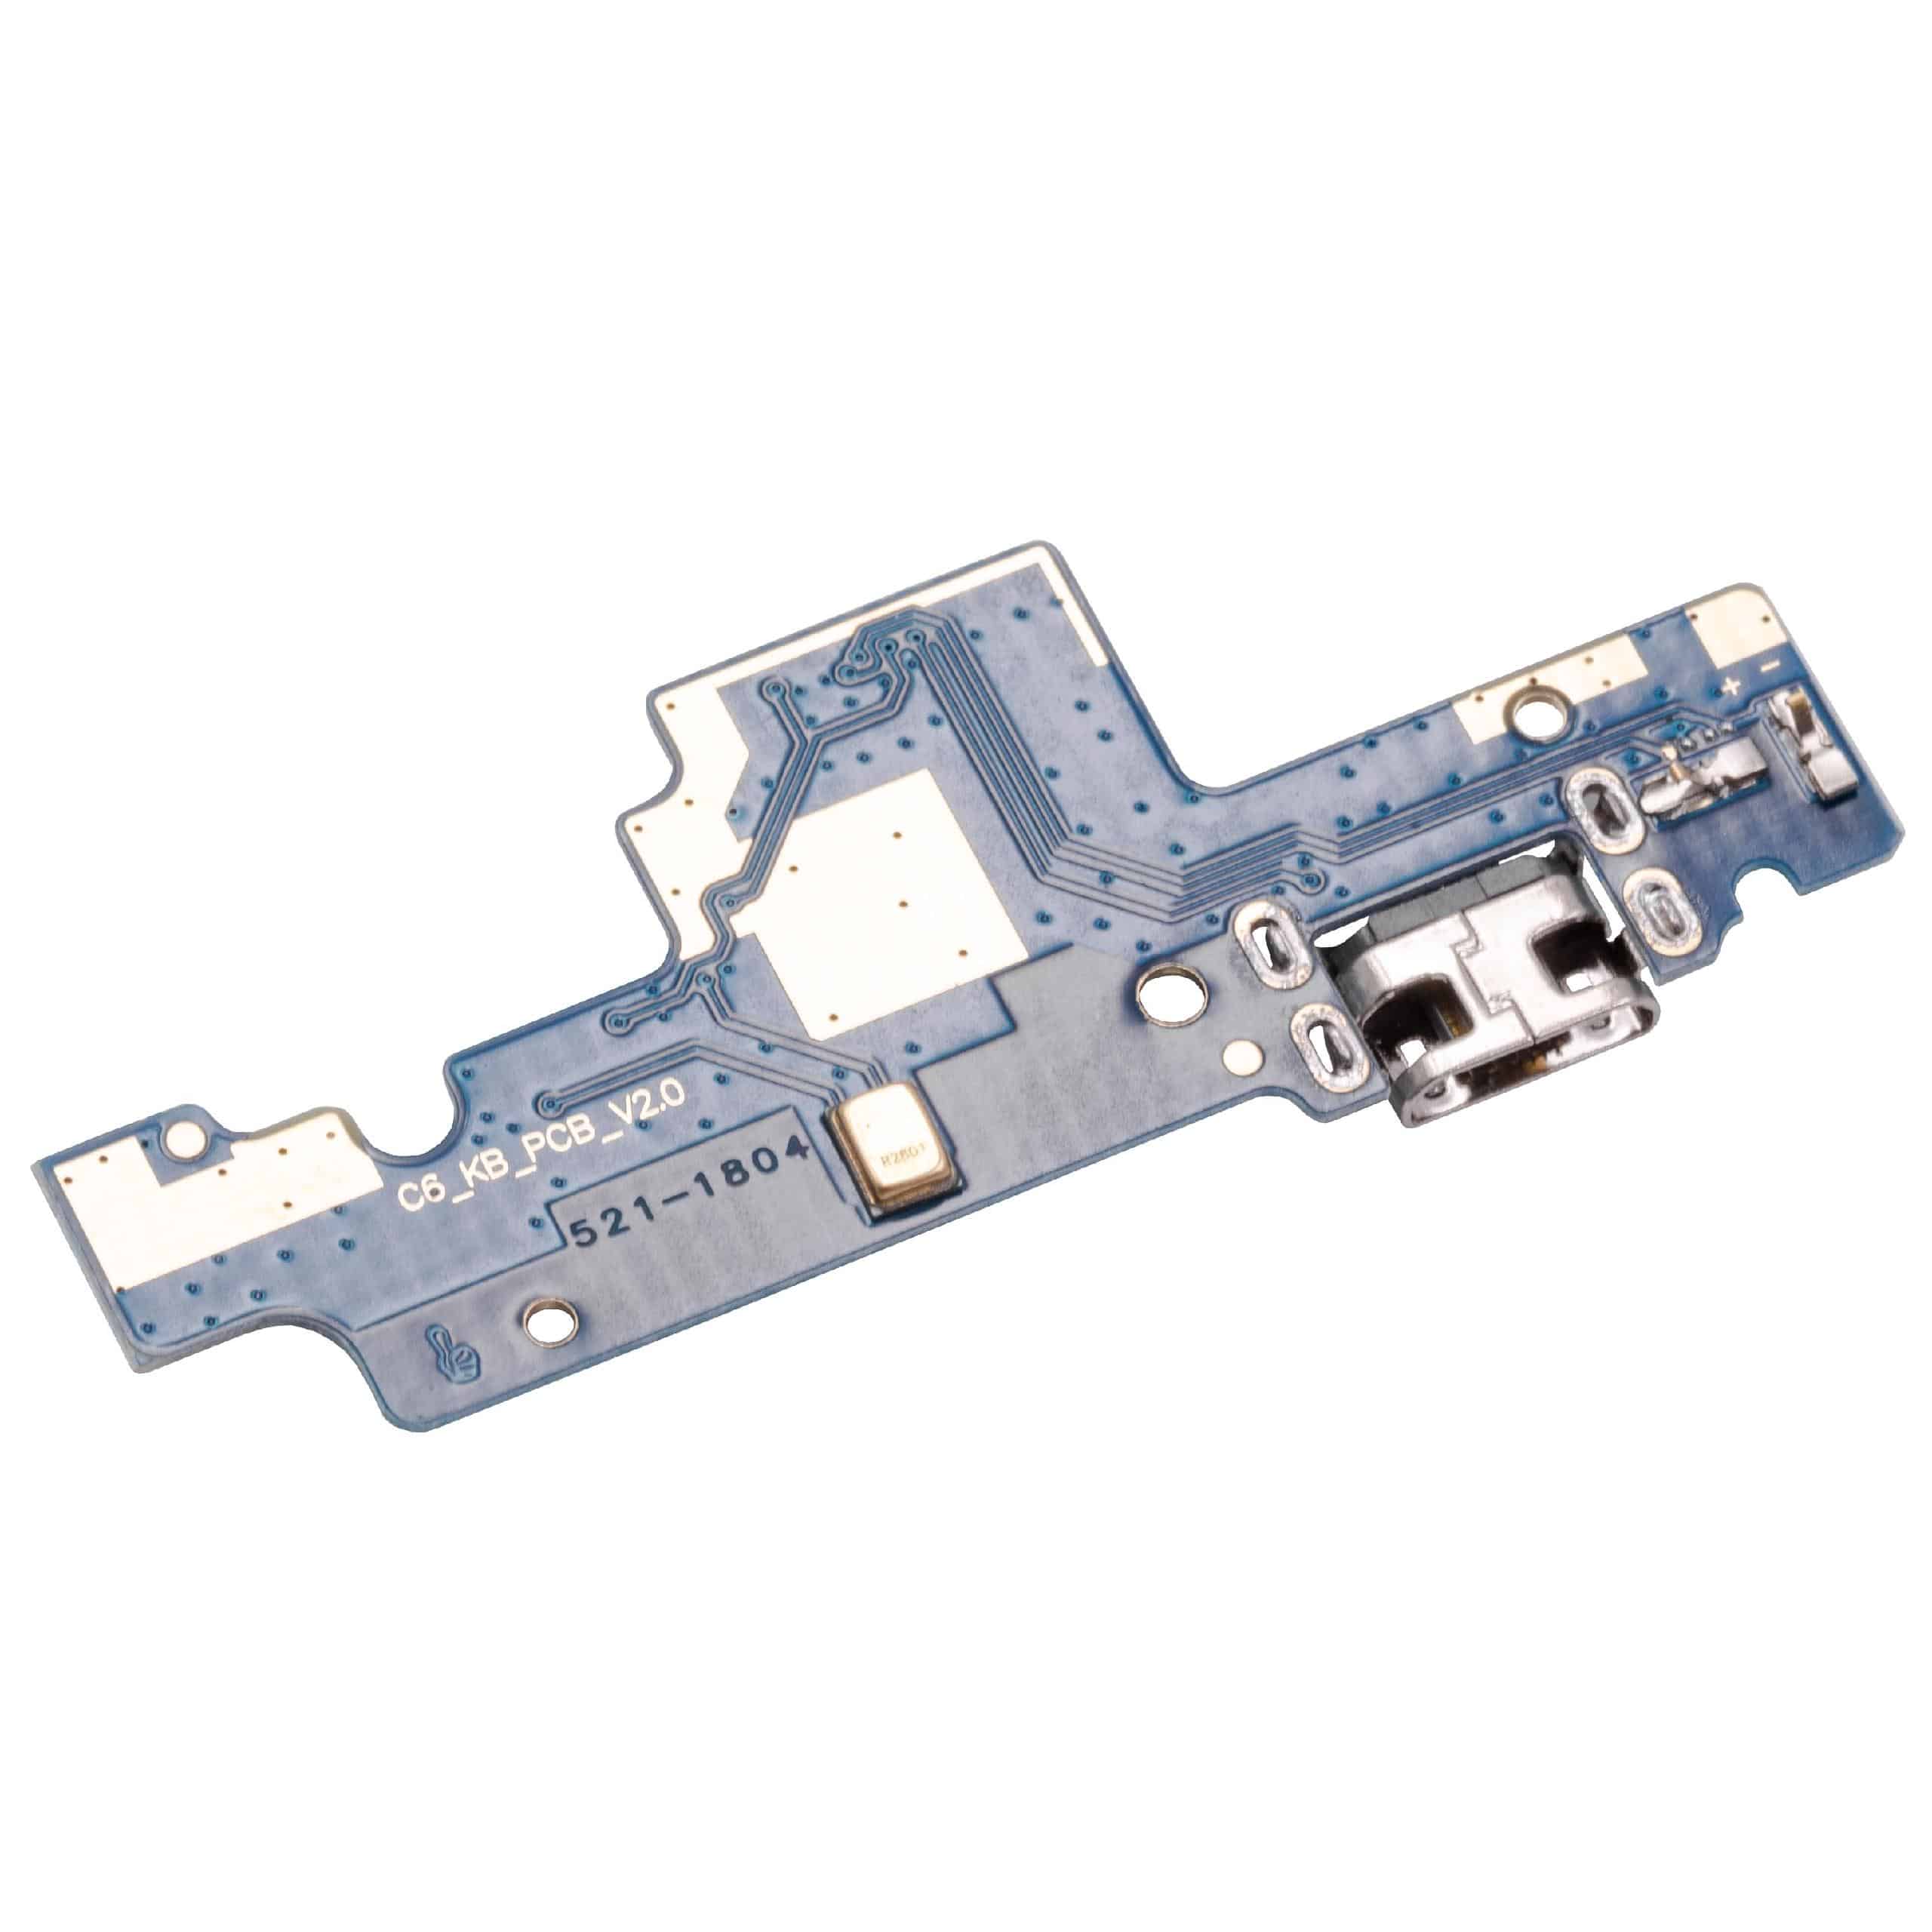 Replacement Micro-USB Port with Microphone replaces Xiaomi C6_KB_PCB_V2.0 for Xiaomi Smartphone Silver